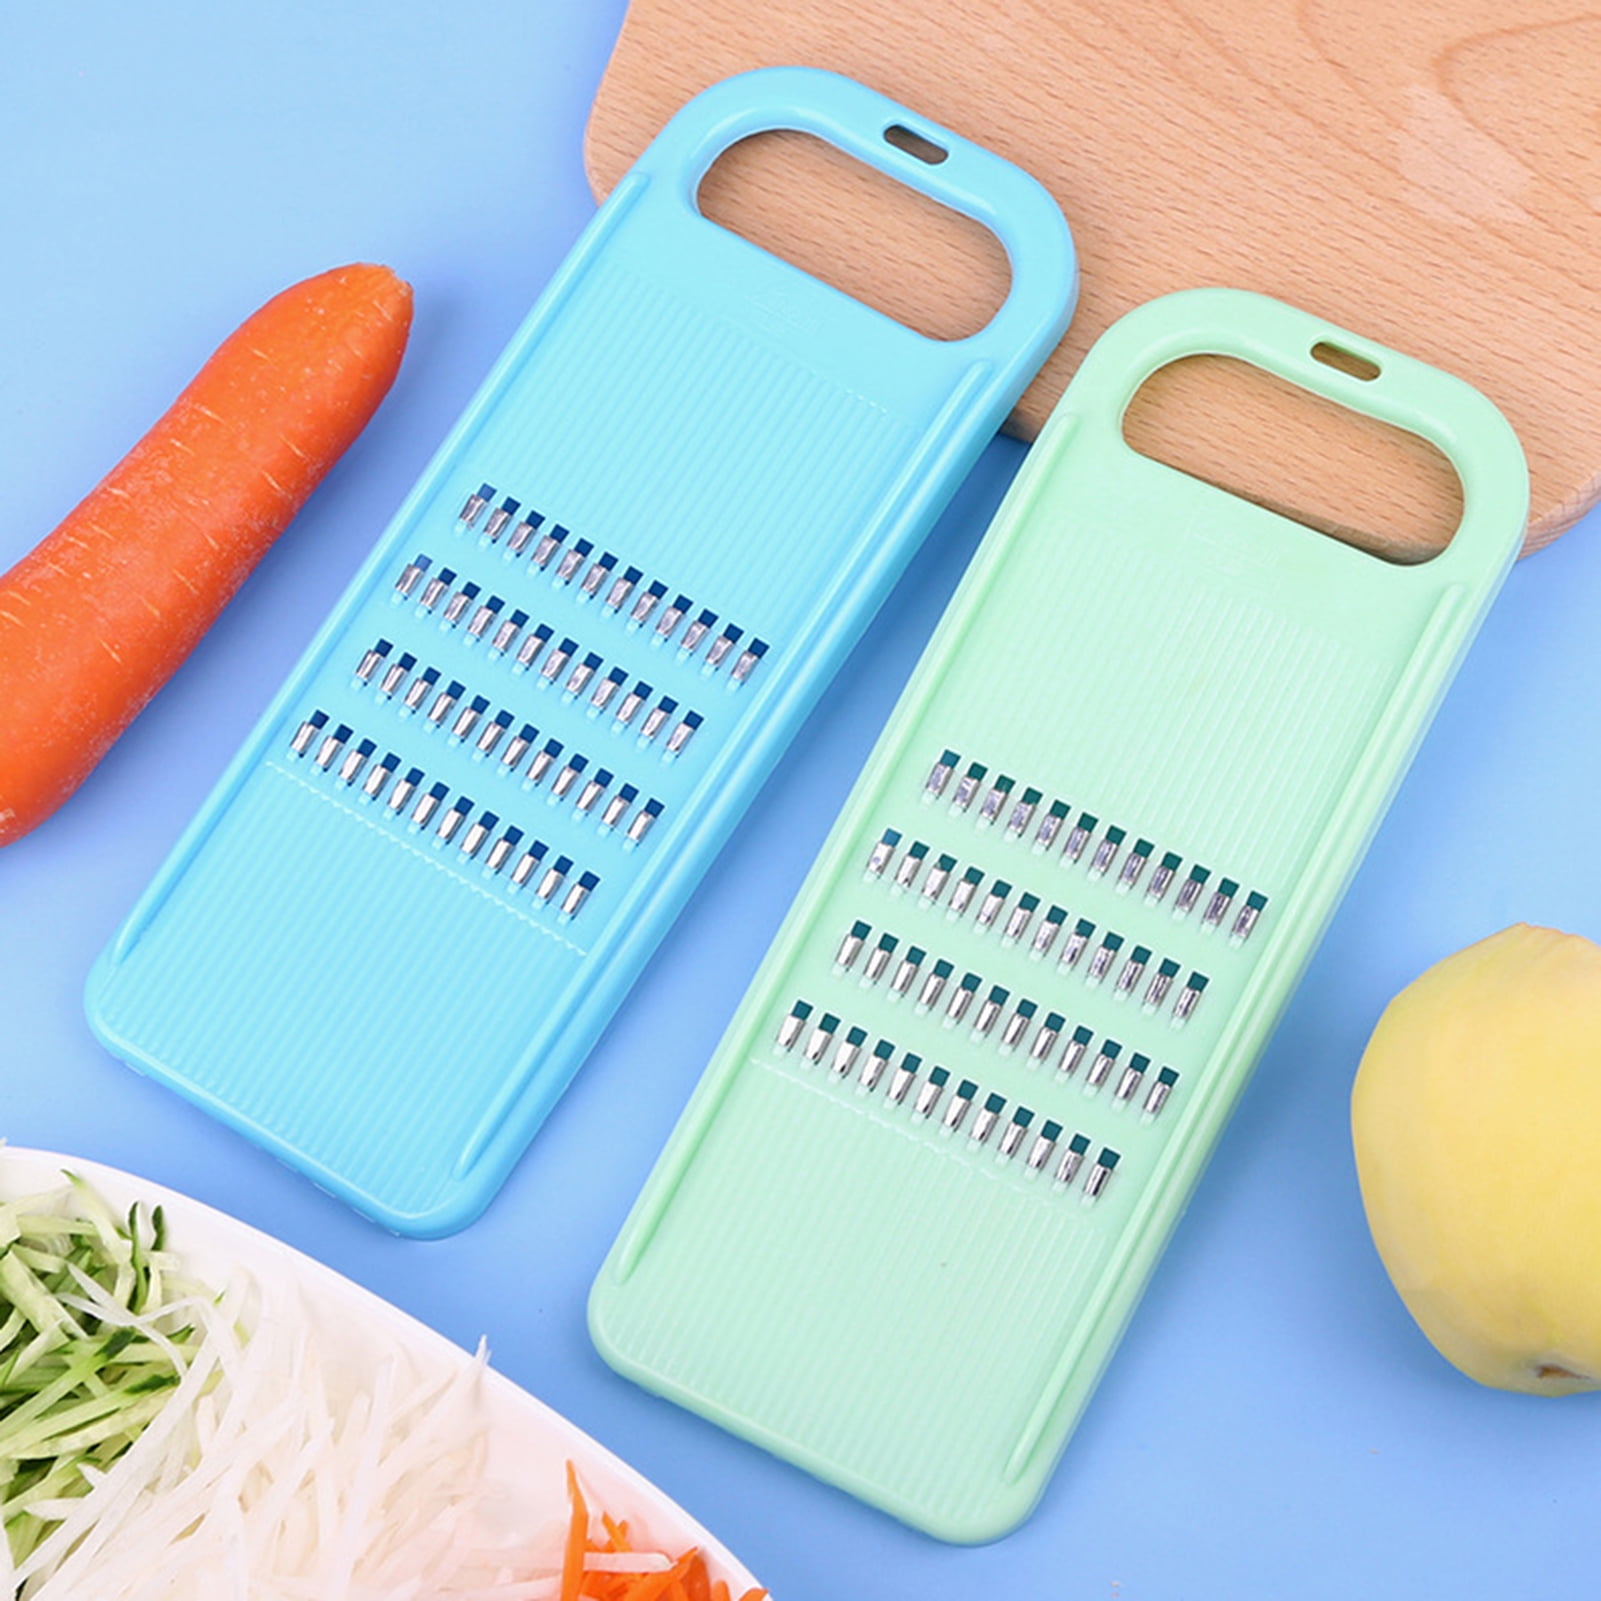  Wooden Korean Carrot, Cabbage, Onion Grater wood Carrot Slicer  Vegetable Chopper Vegetable Graters Carrot Knife Korean Carrot Grater  Vegetable Slicer Kitchen Food Slicer Carrot Slicer GRATER KOREAN: Home &  Kitchen